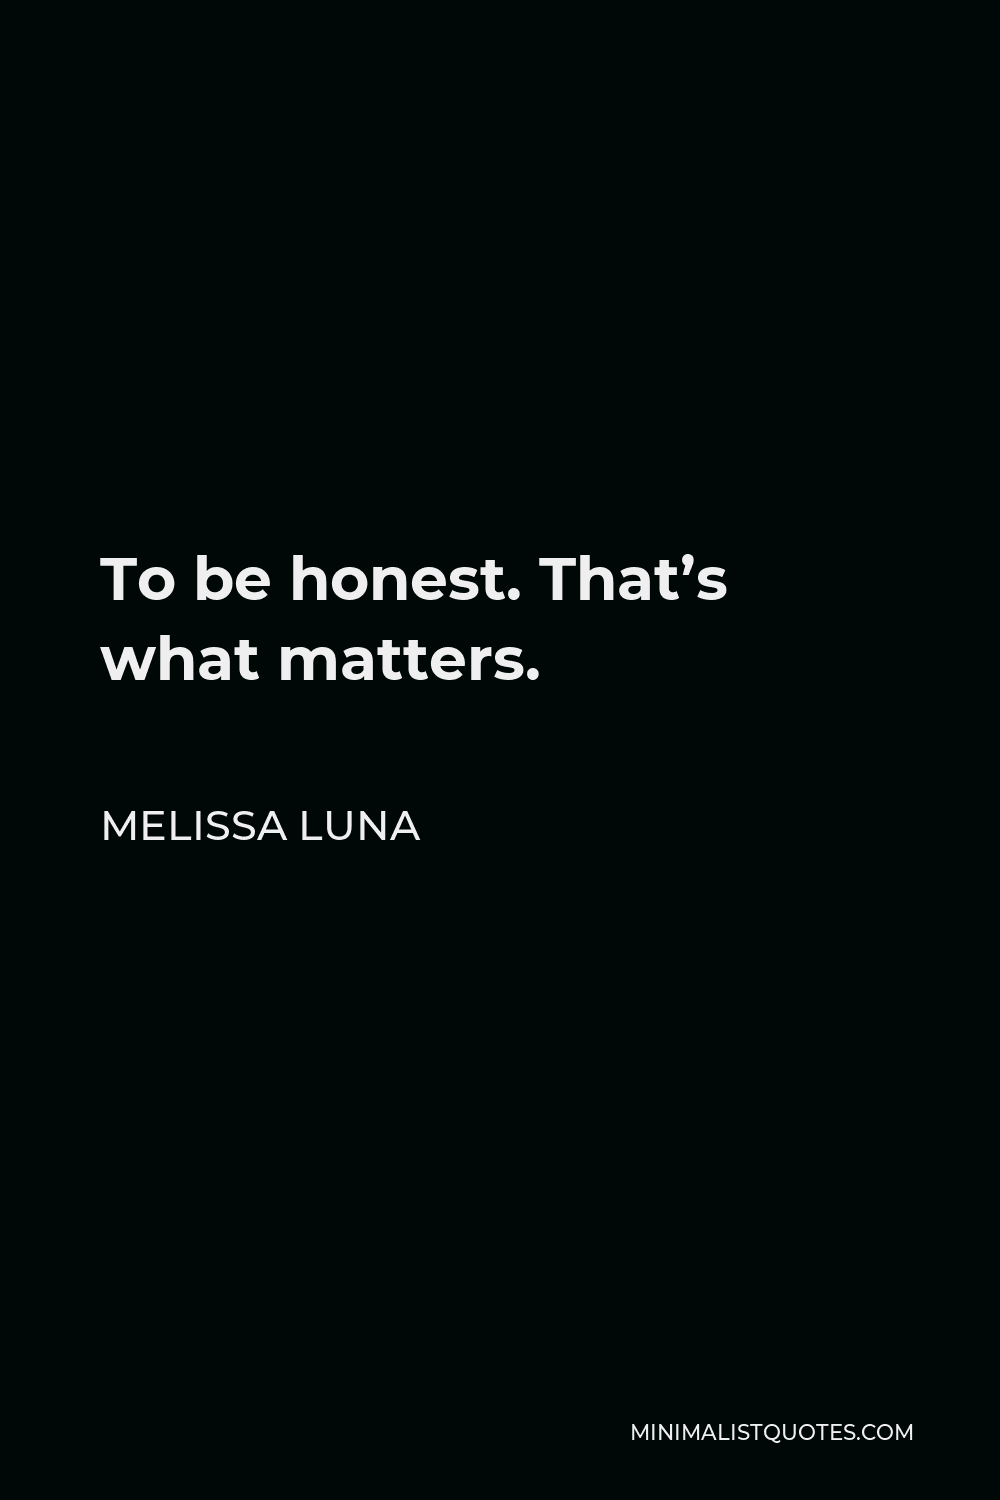 Melissa Luna Quote - To be honest. That’s what matters.